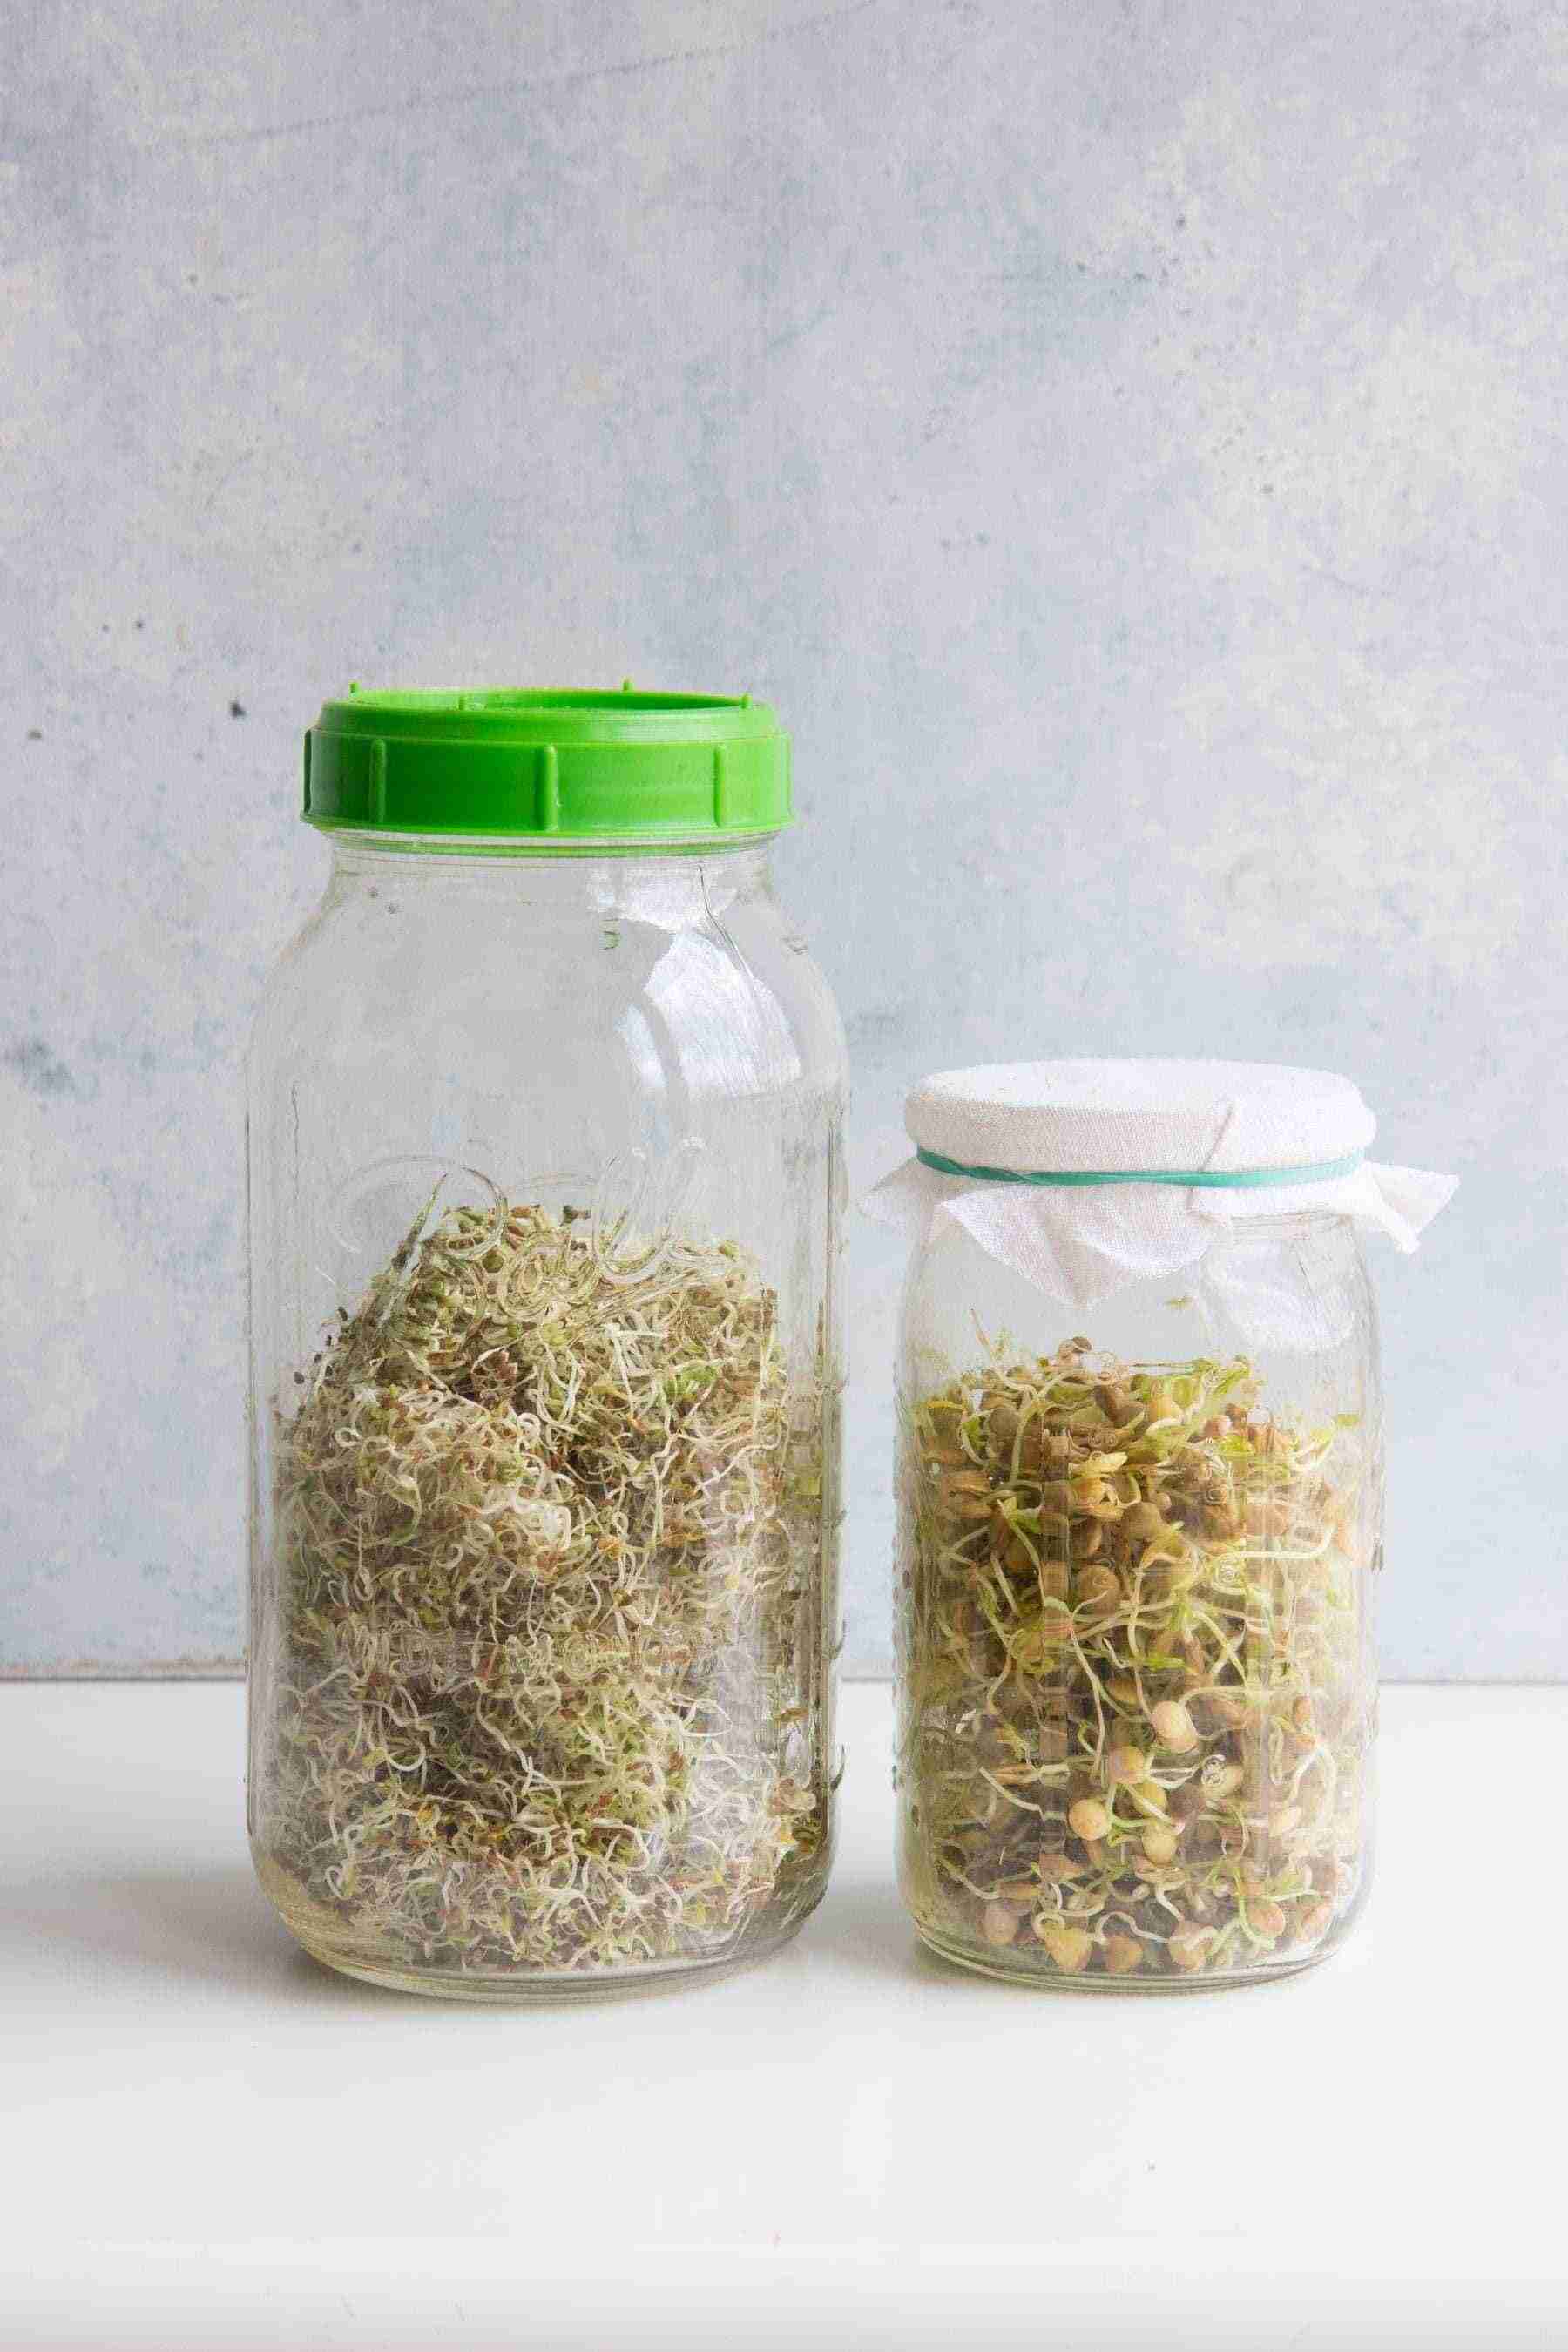 Two mason jars side-by-side filled with clover and lentil sprouts